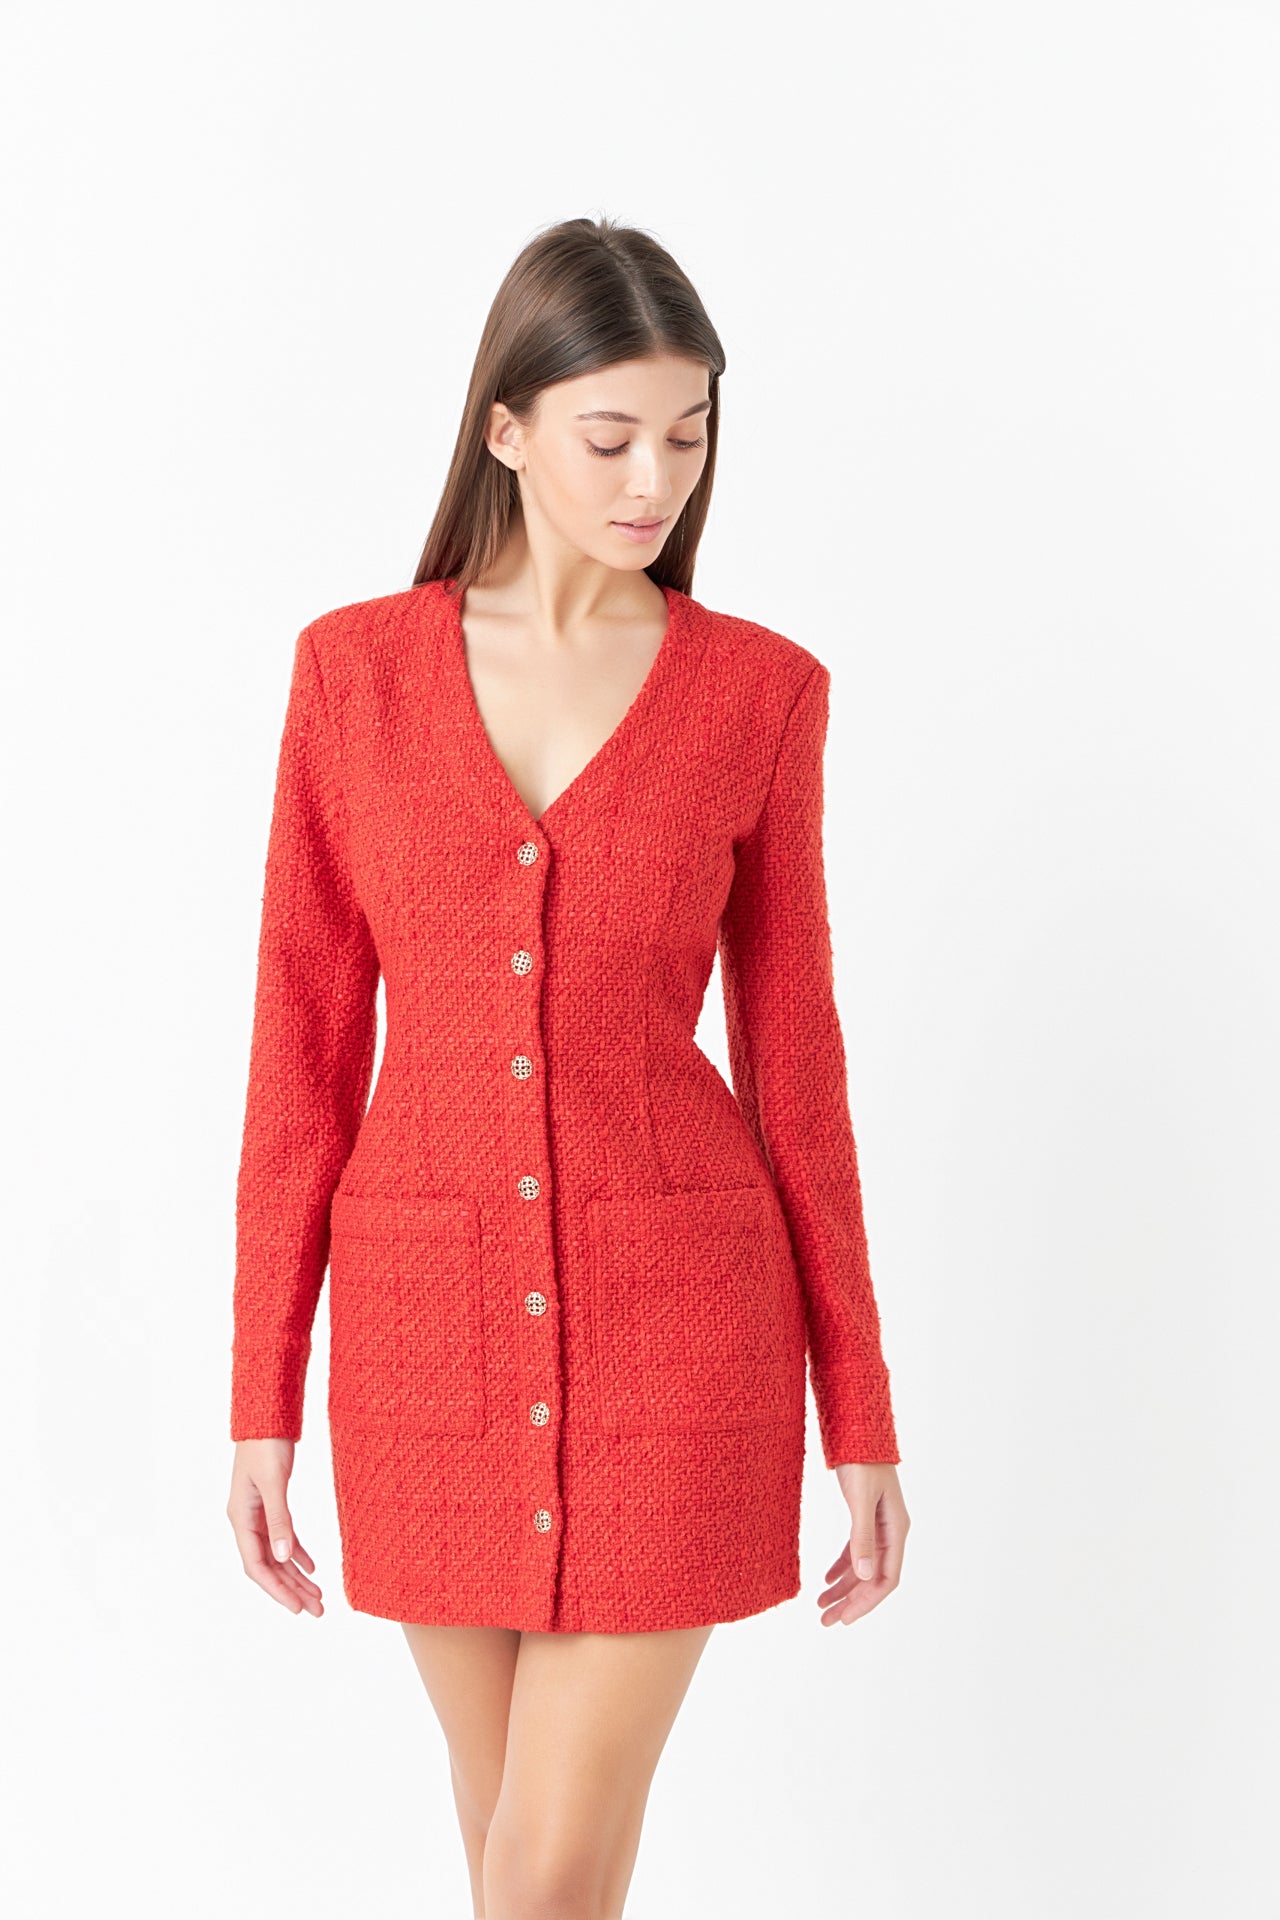 ENDLESS ROSE - Textured Button Down Dress - DRESSES available at Objectrare